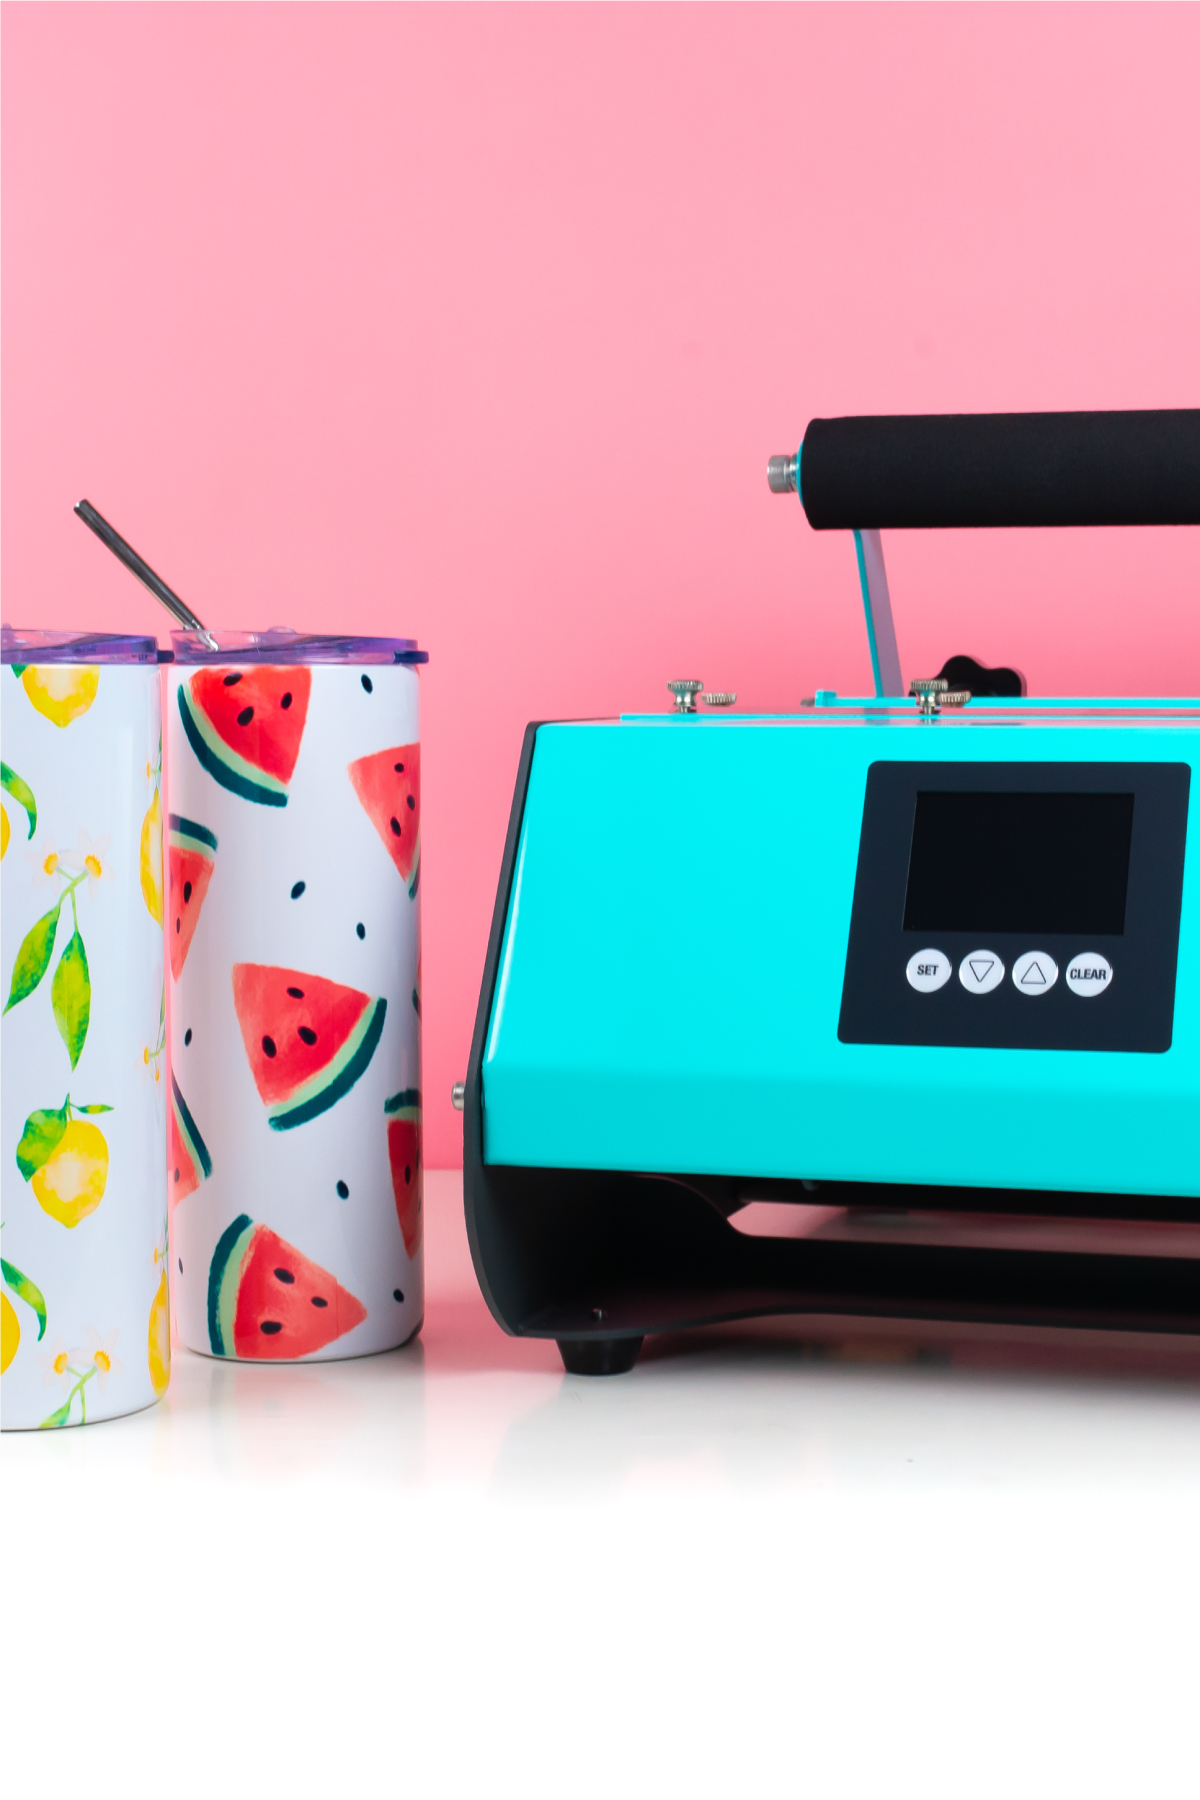 PYD Life Tumbler Press for Sublimation - 2 in 1 - Setup and Review 